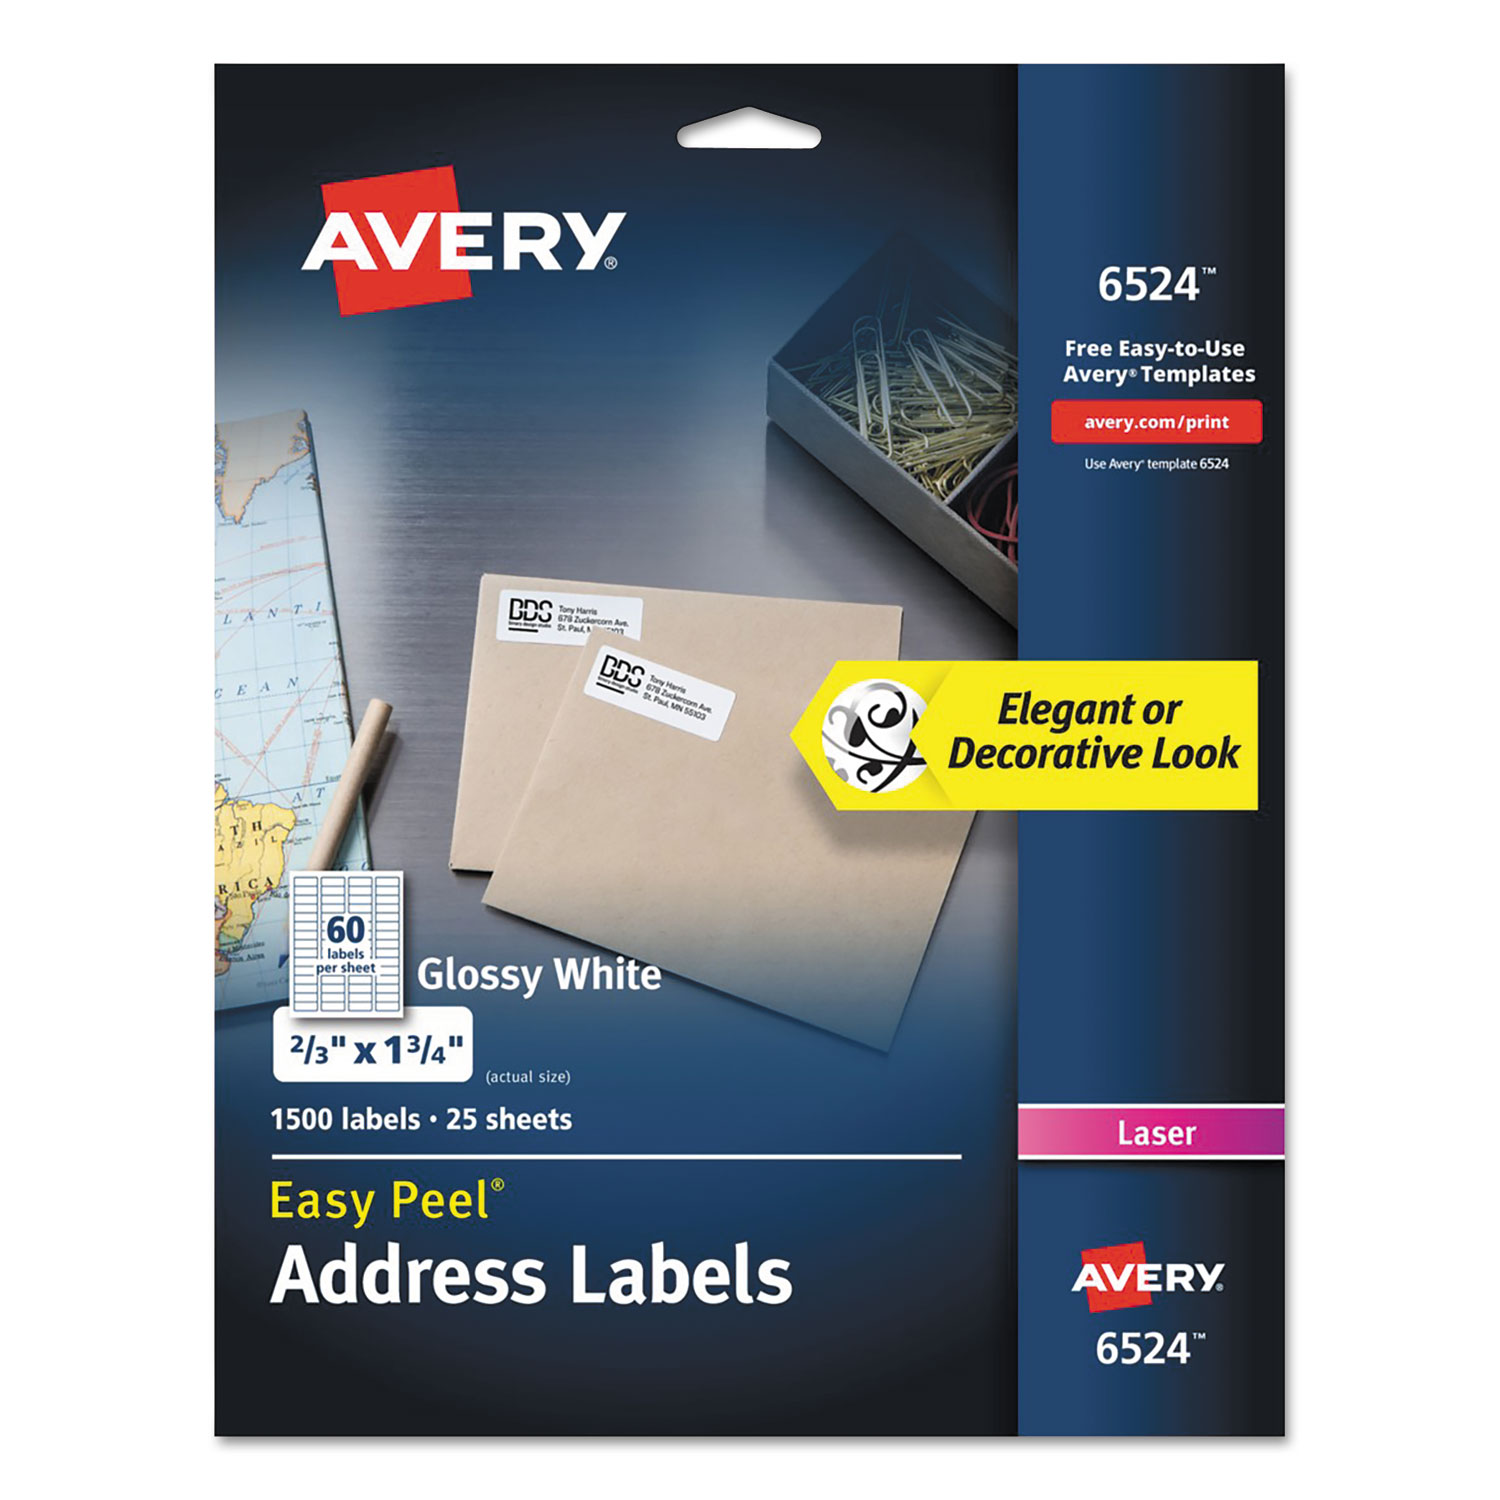  Avery 06524 Glossy White Easy Peel Mailing Labels w/ Sure Feed Technology, Laser Printers, 0.66 x 1.75, White, 60/Sheet, 25 Sheets/Pack (AVE6524) 